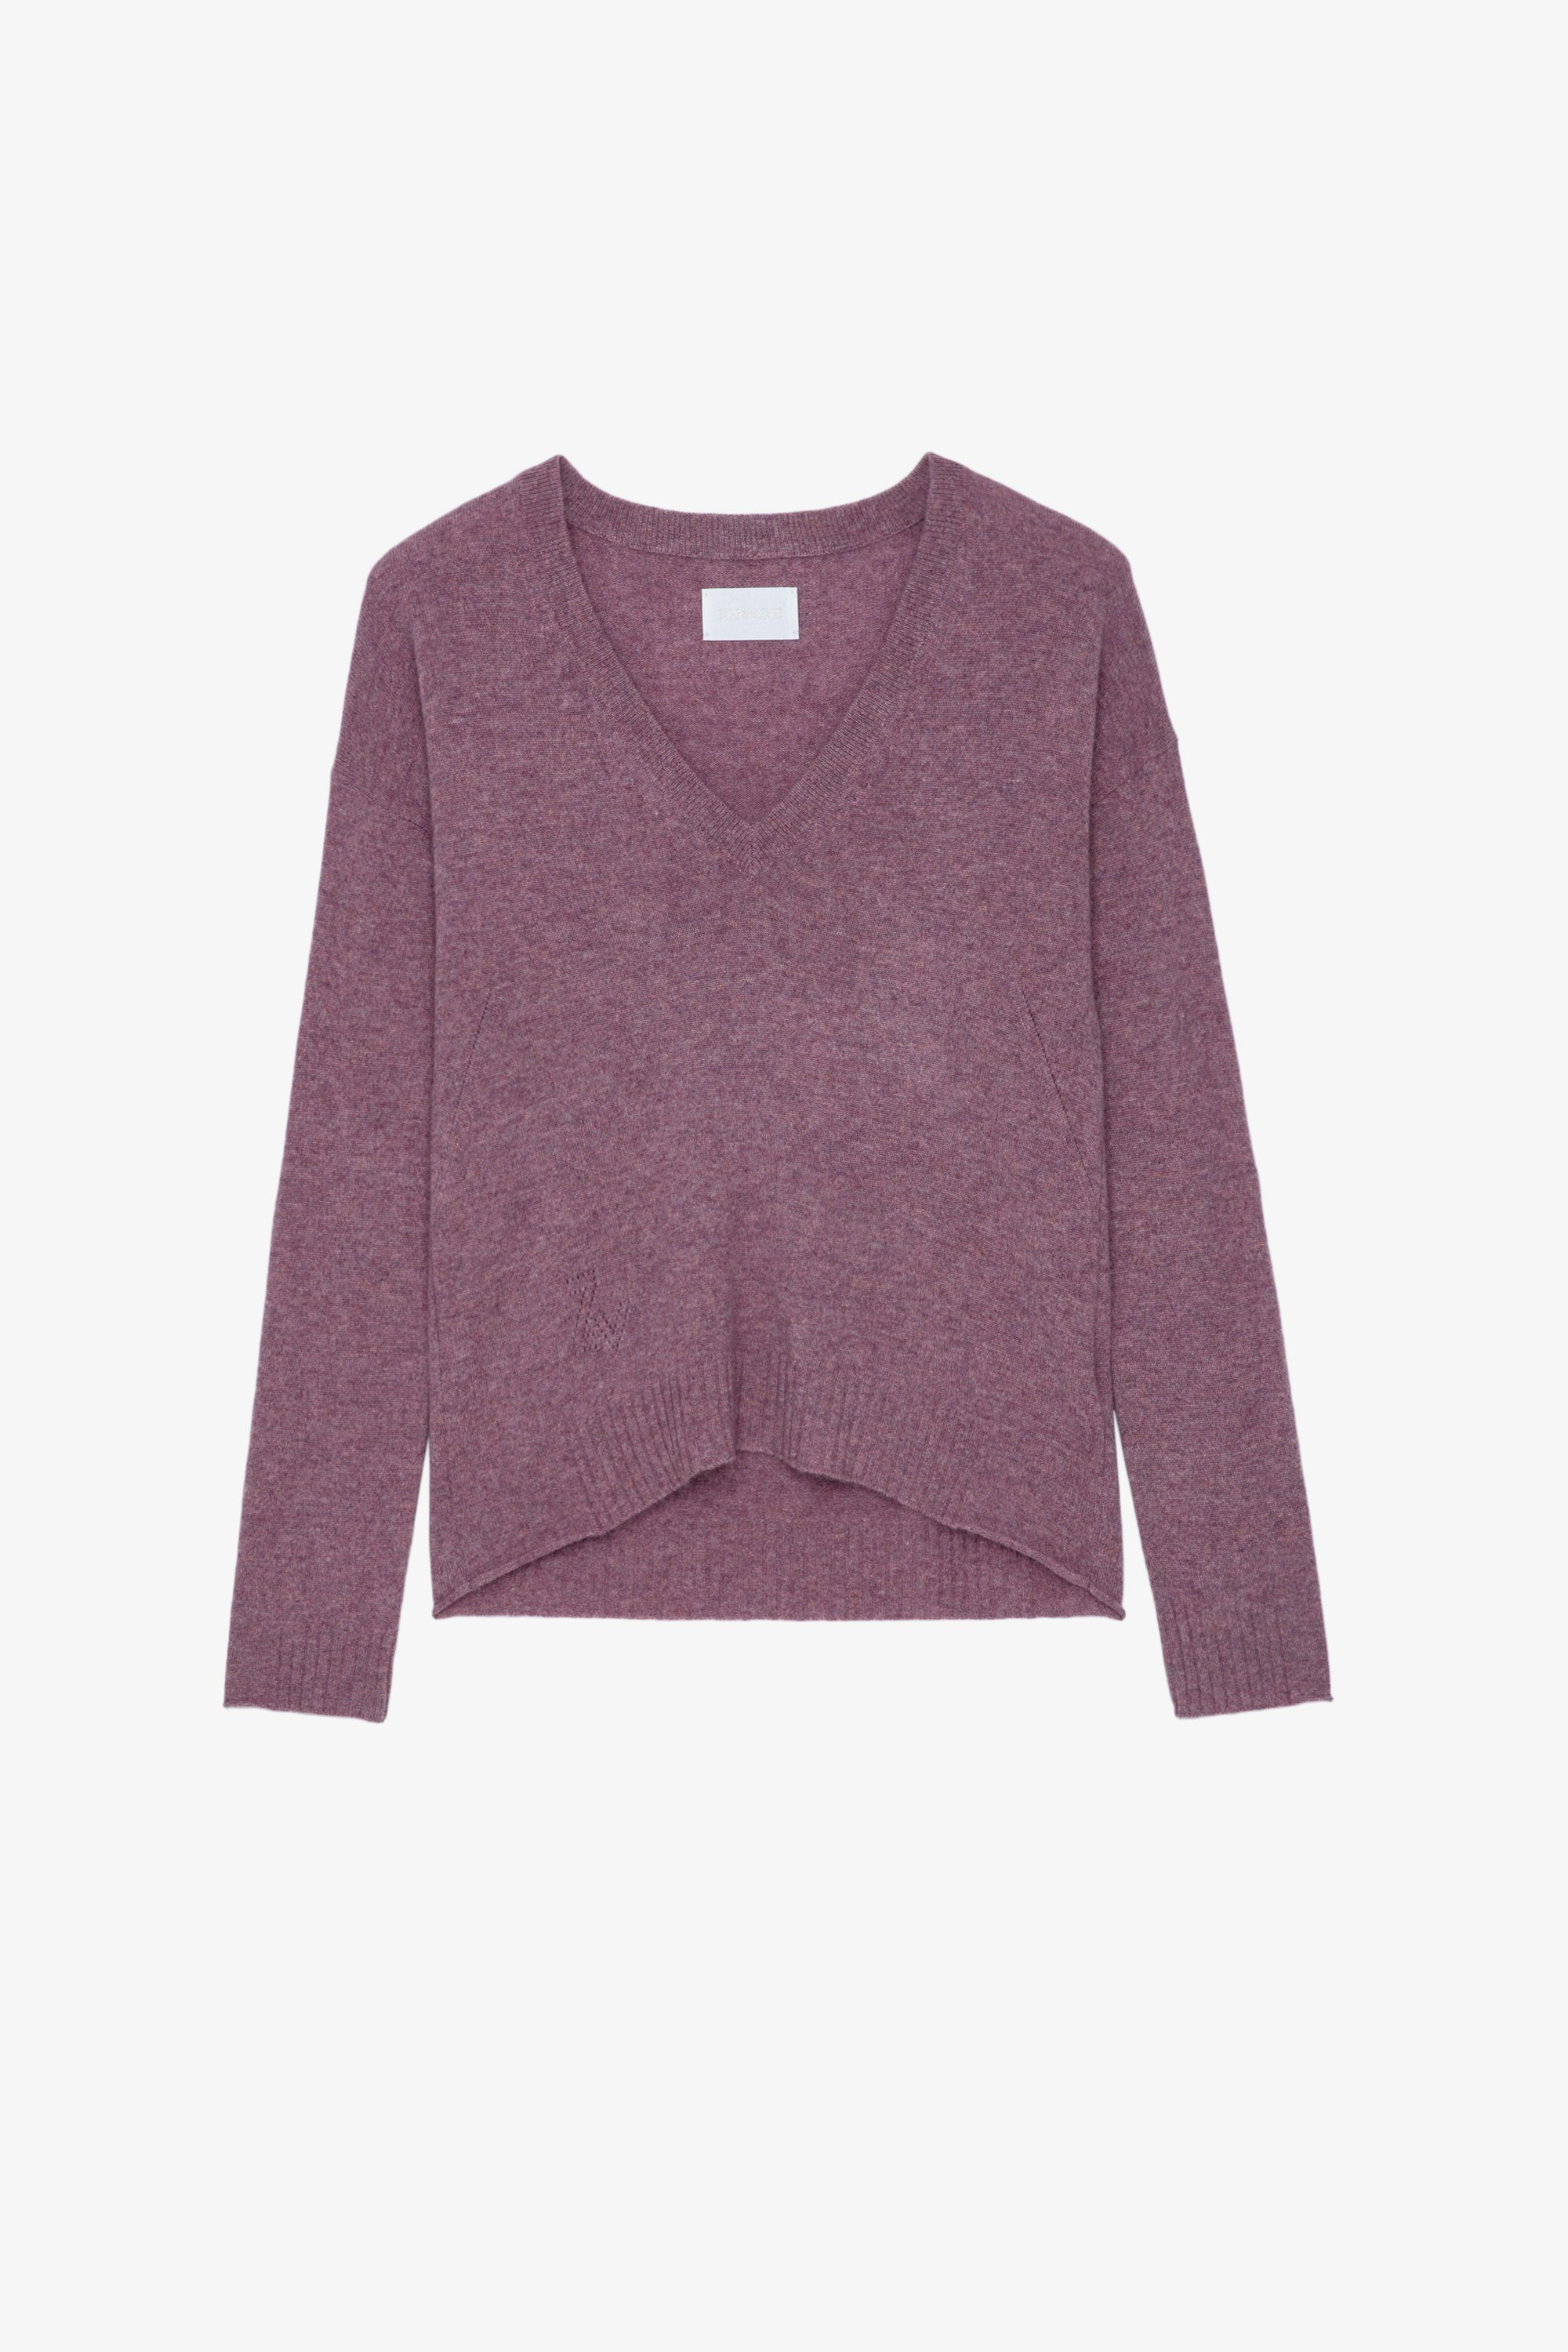 Vivi Patch カシミヤニット Women’s pink cashmere jumper with star patches on the elbows